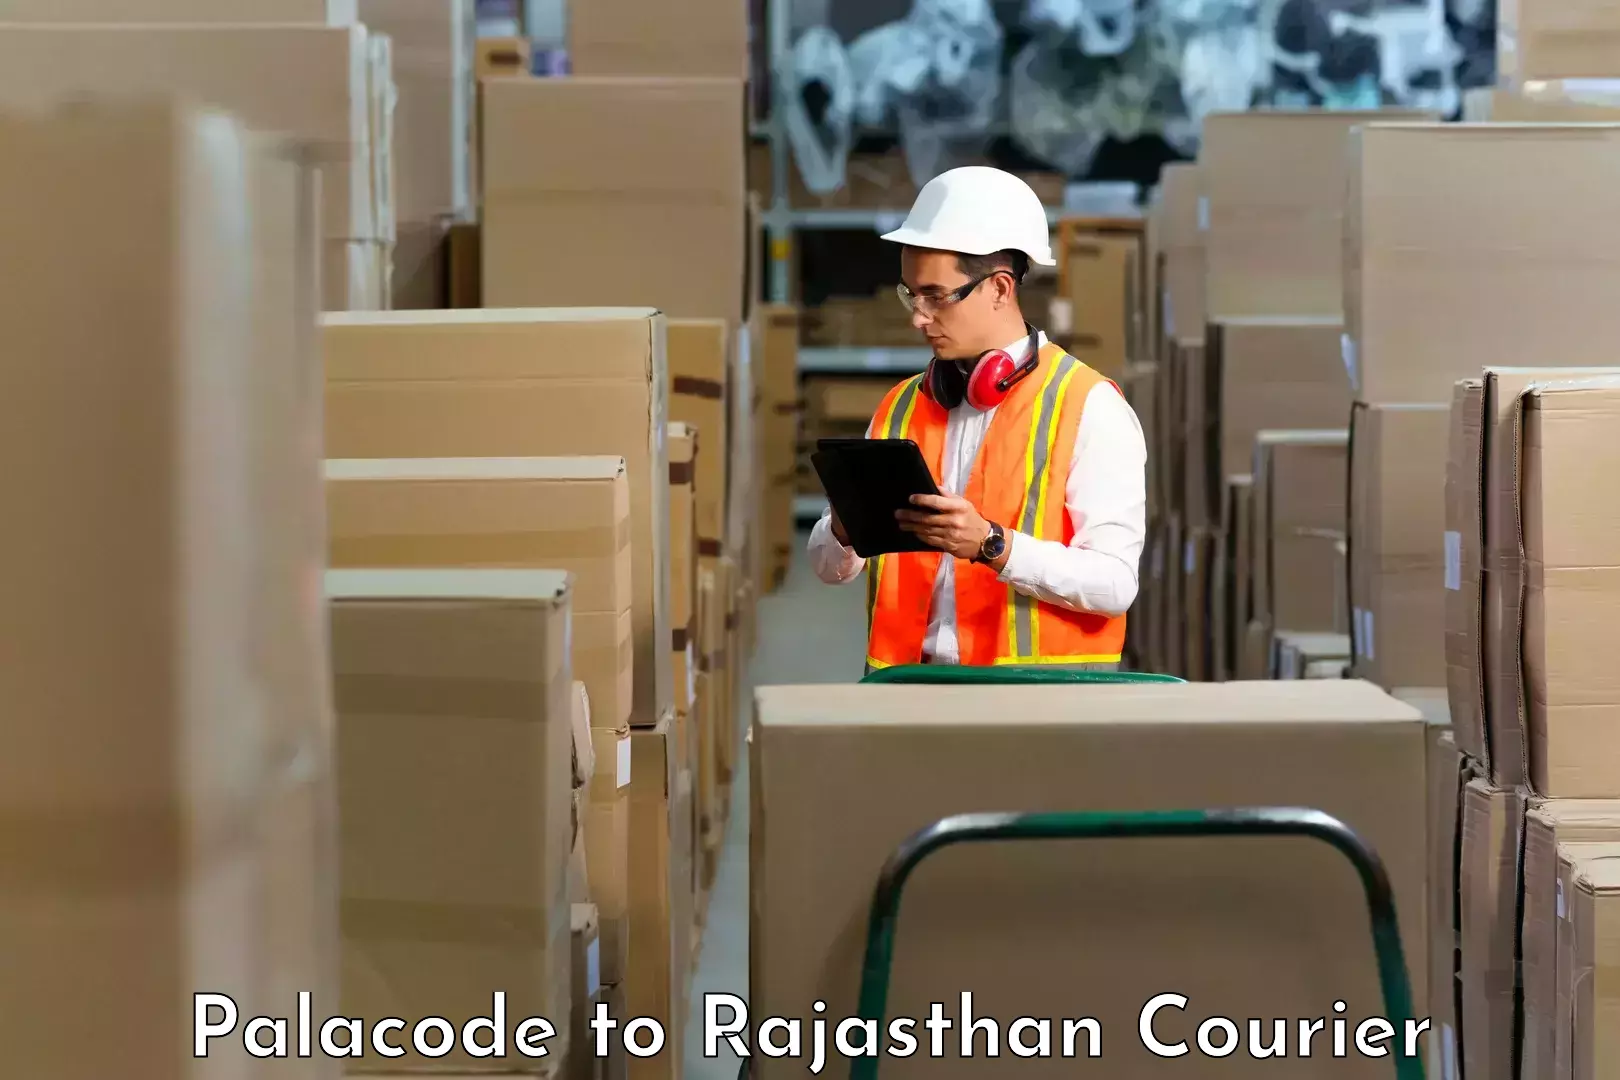 On-call courier service Palacode to Rajasthan